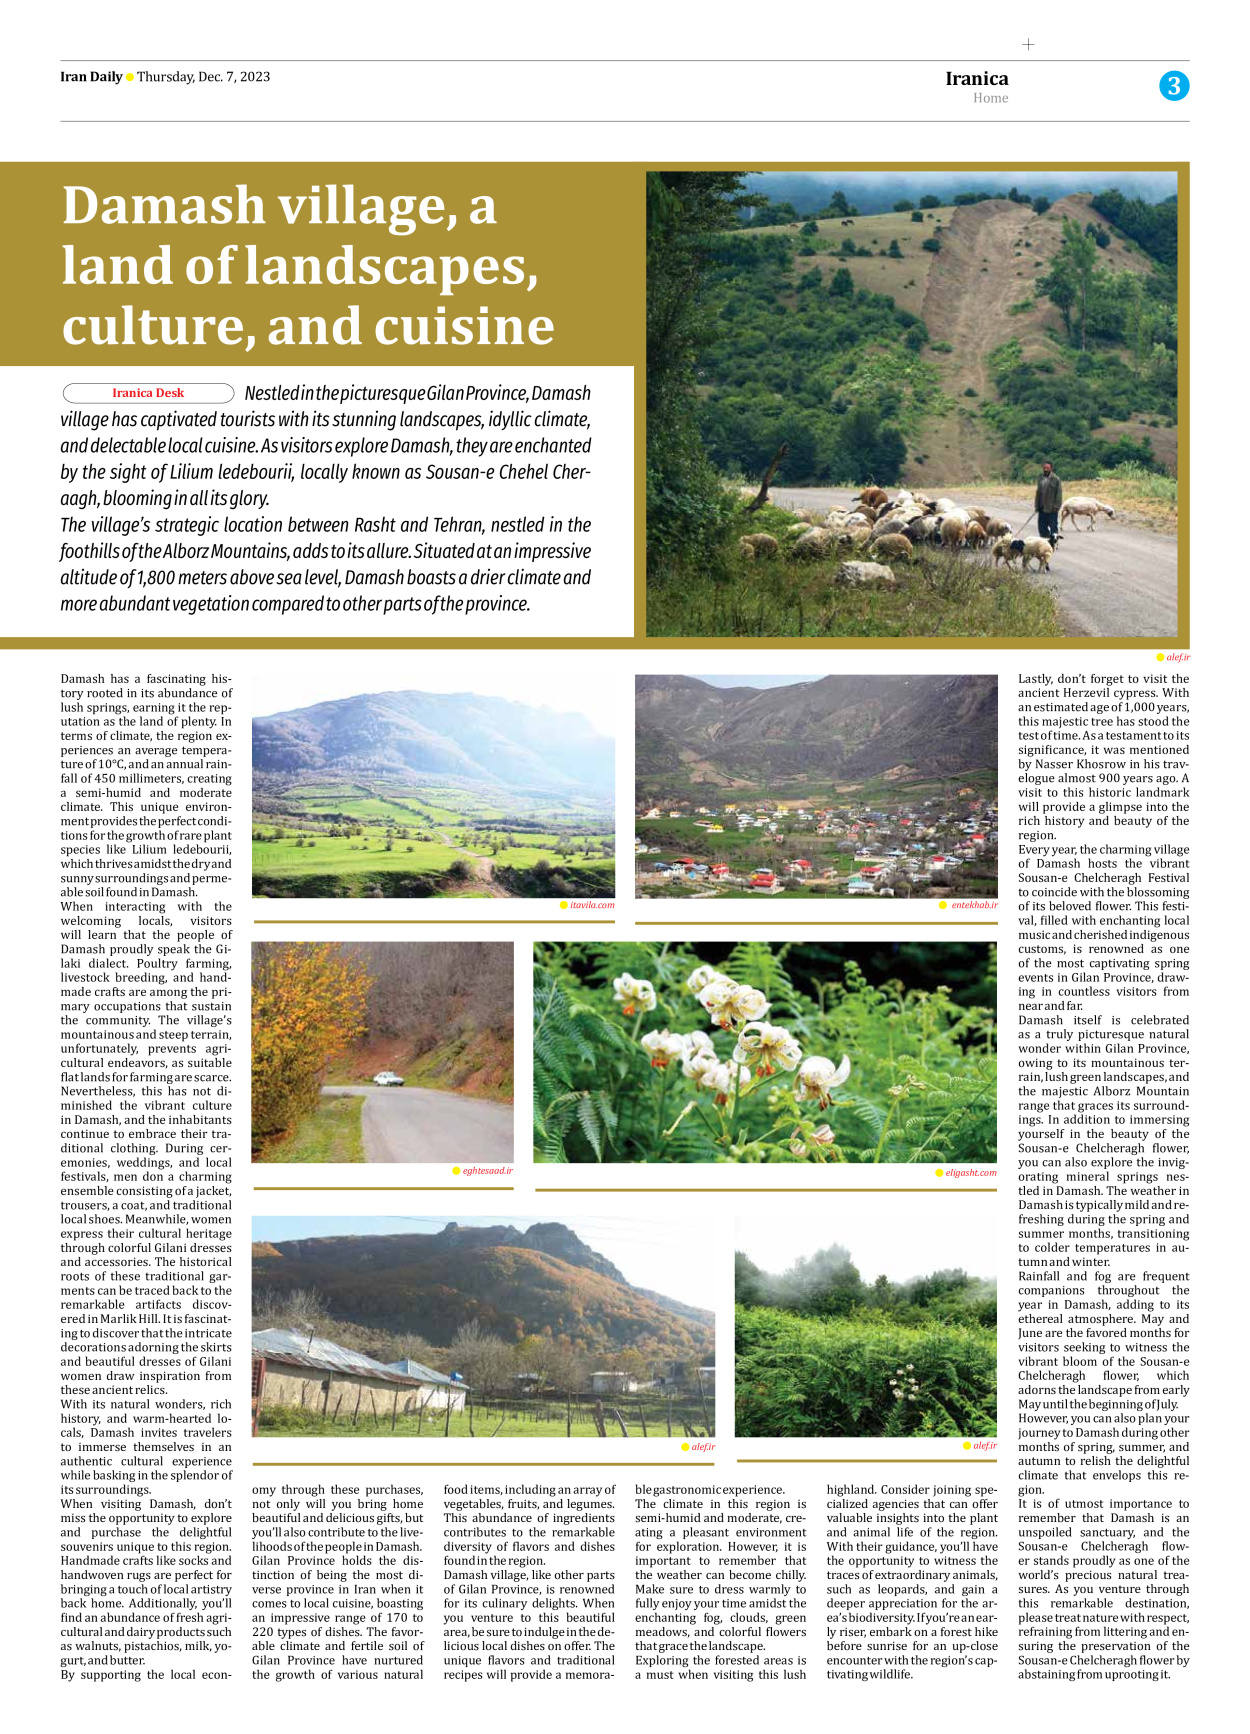 Iran Daily - Number Seven Thousand Four Hundred and Fifty Four - 07 December 2023 - Page 3